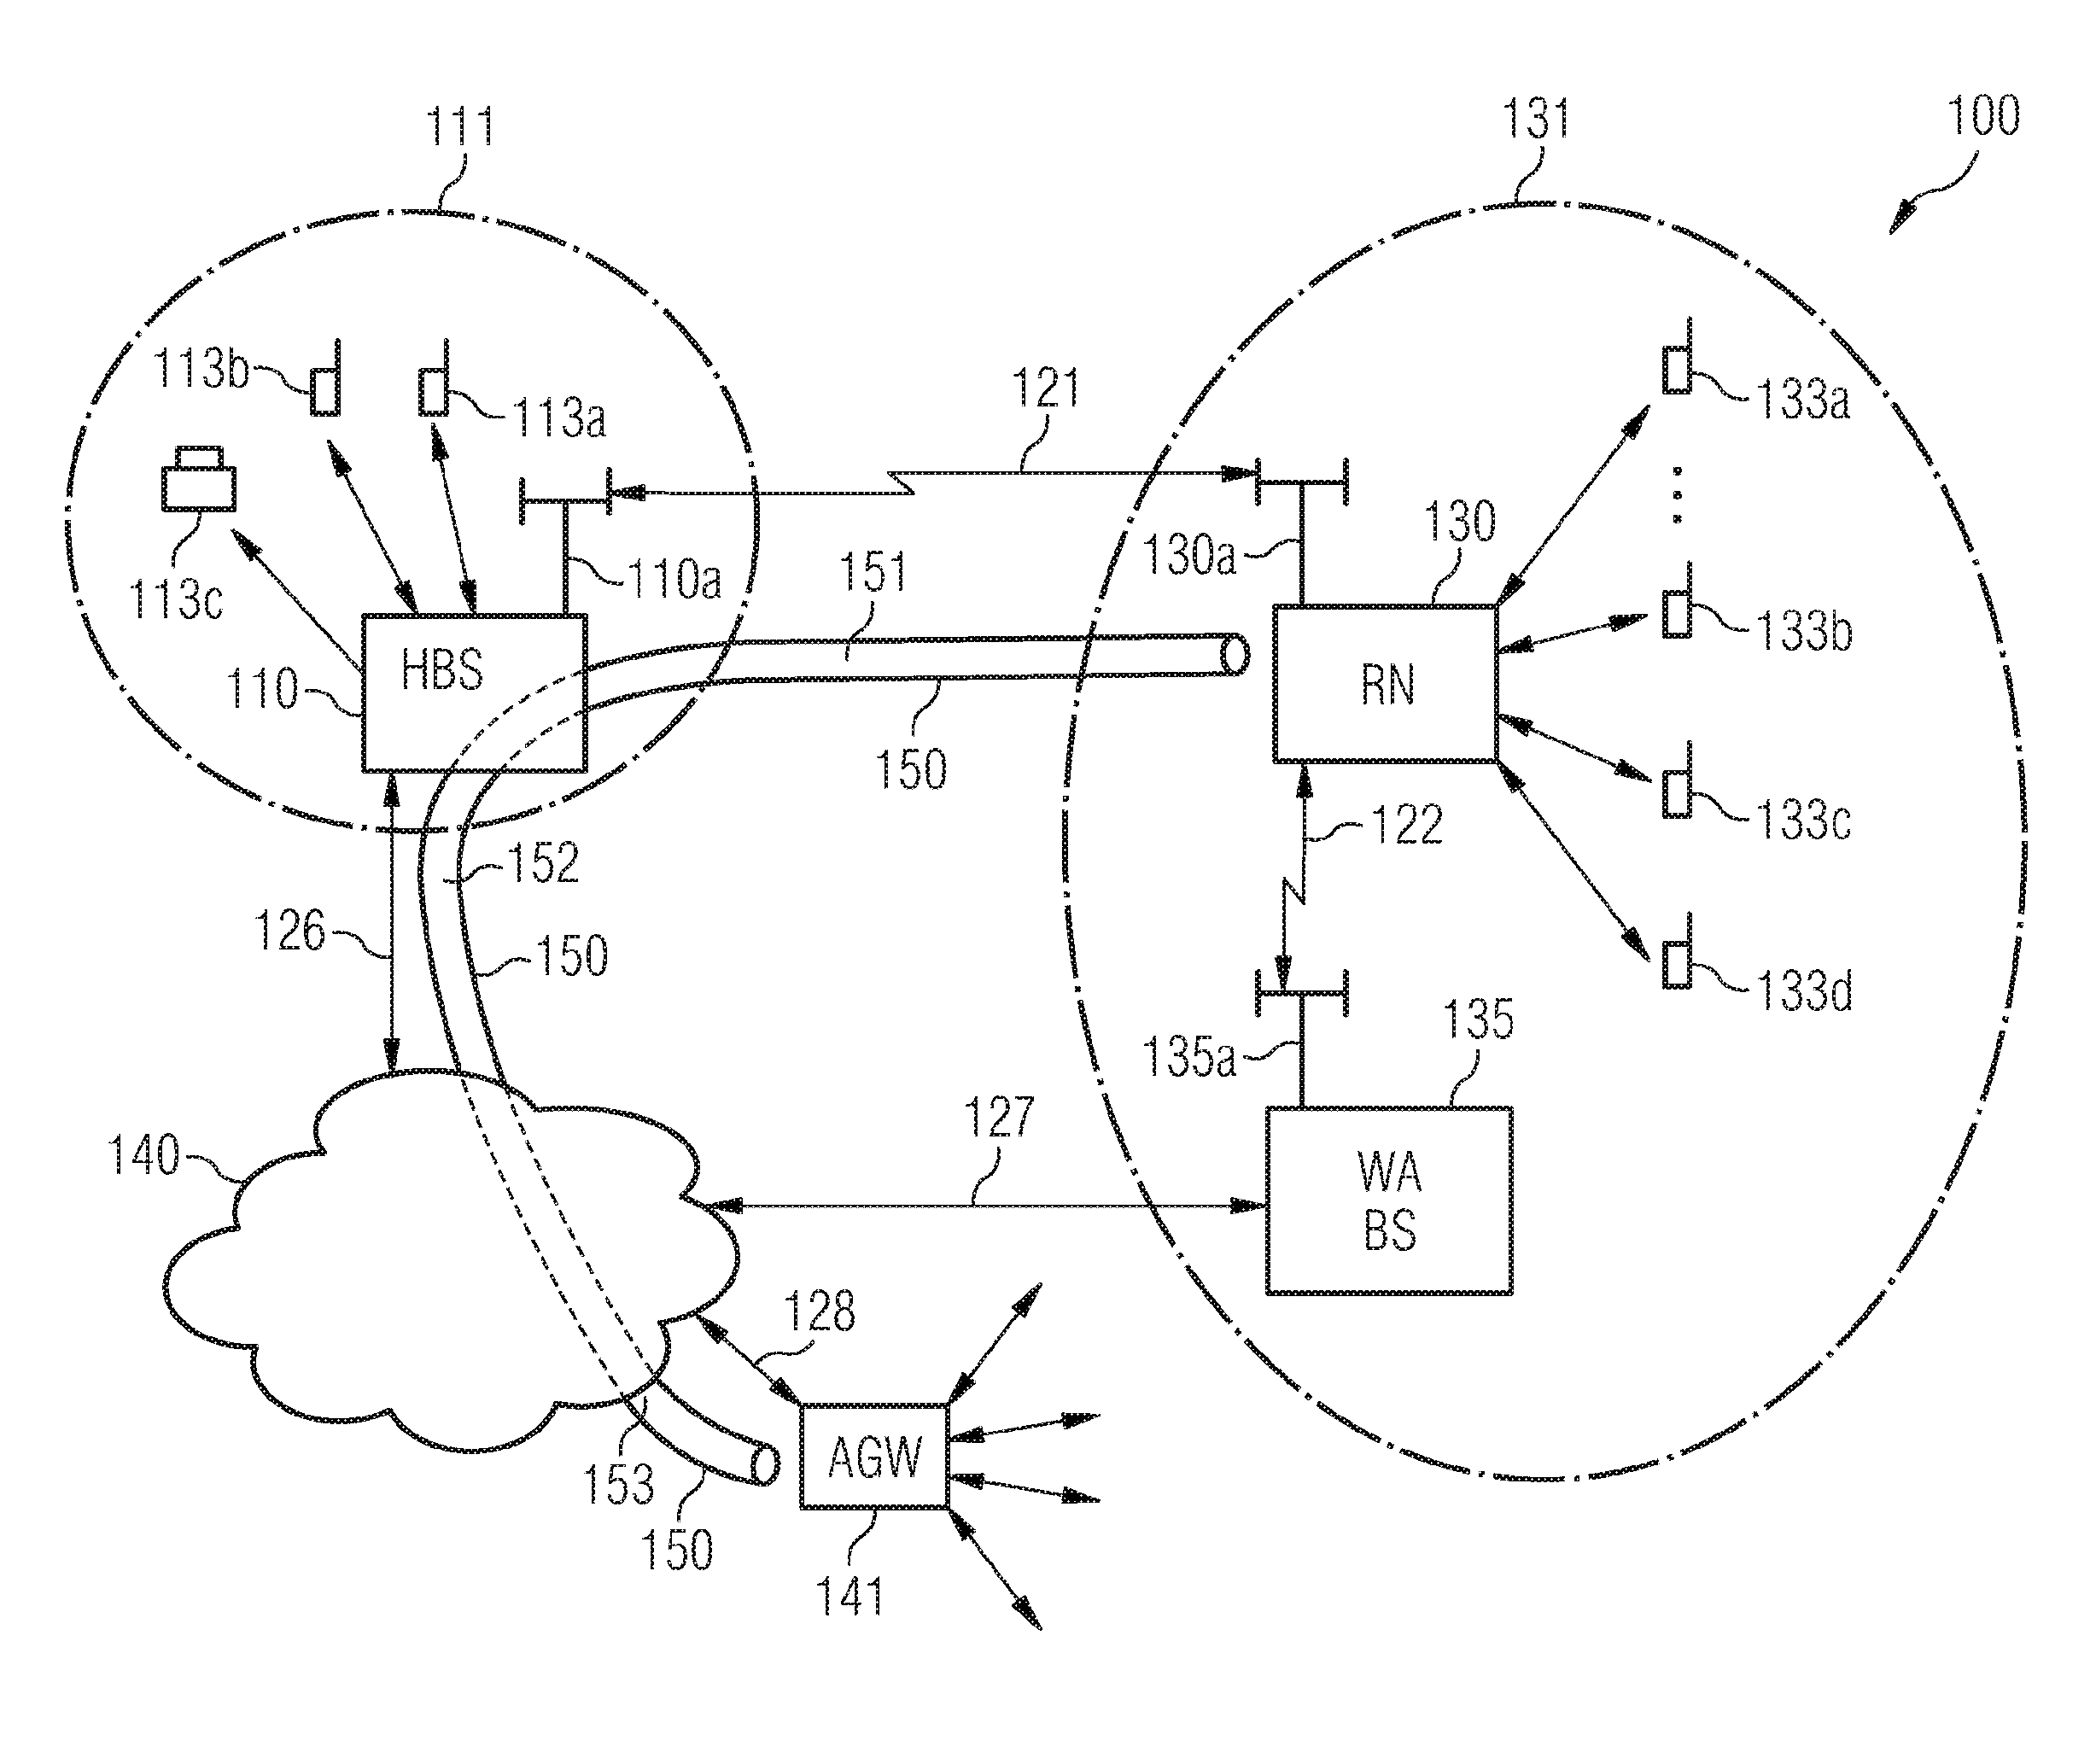 Network comprising a privately owned base station coupled with a publicly available network element